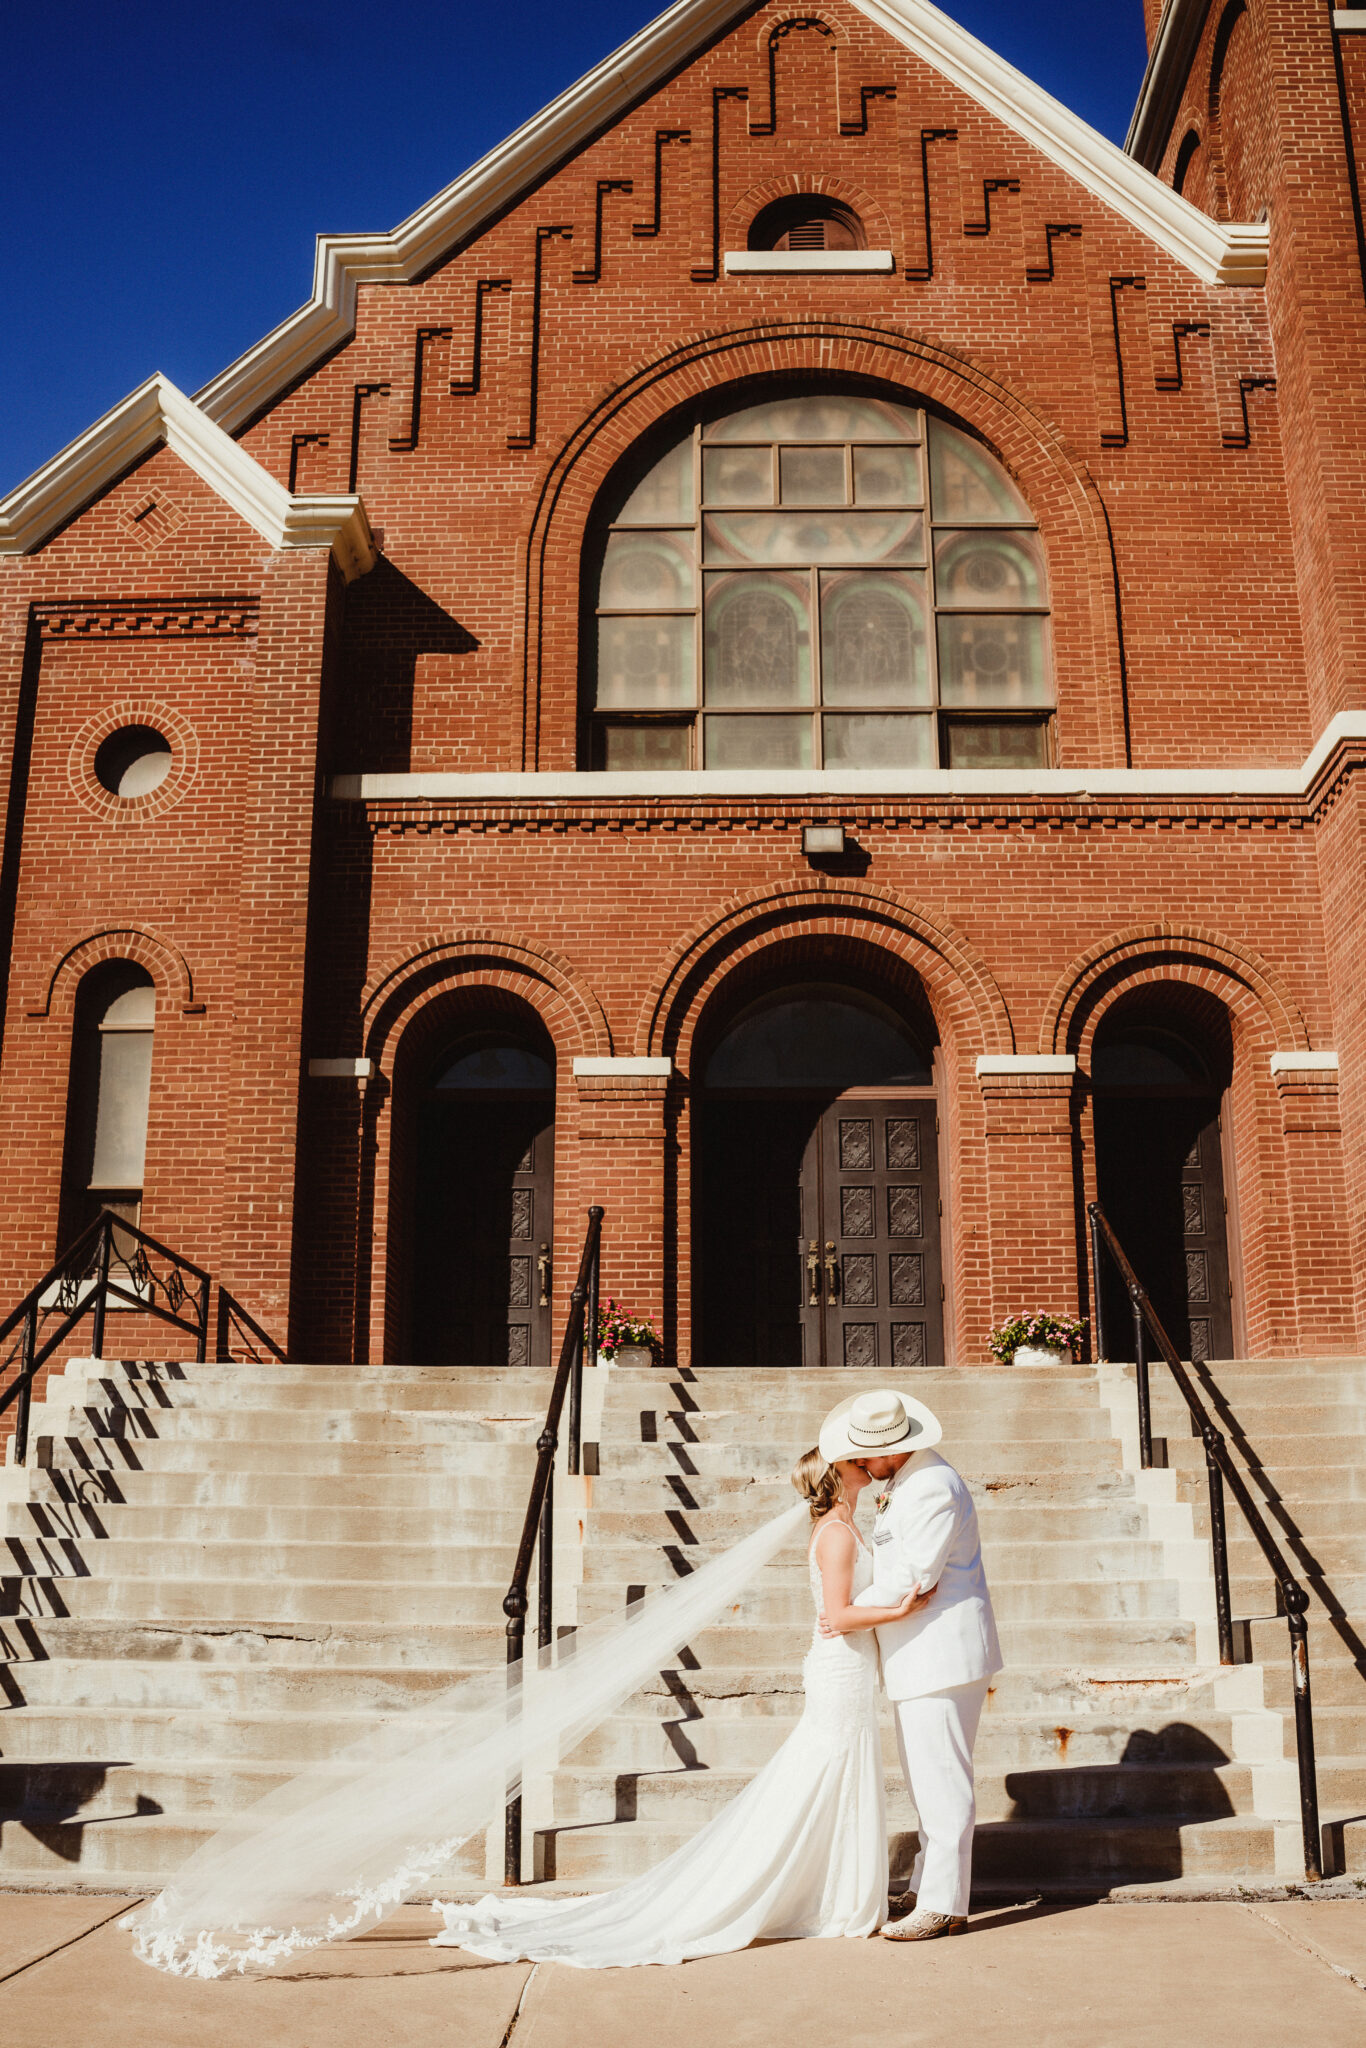 A rustic bride and groom share a kiss in front of their red brick Wisconsin wedding venue. Cowboy wedding Bridal veil photo Church wedding venue Wisconsin #weddingplanning #weddingtimeline #diywedding #wisconsinweddingphotographer #wisconsinchurchwedding